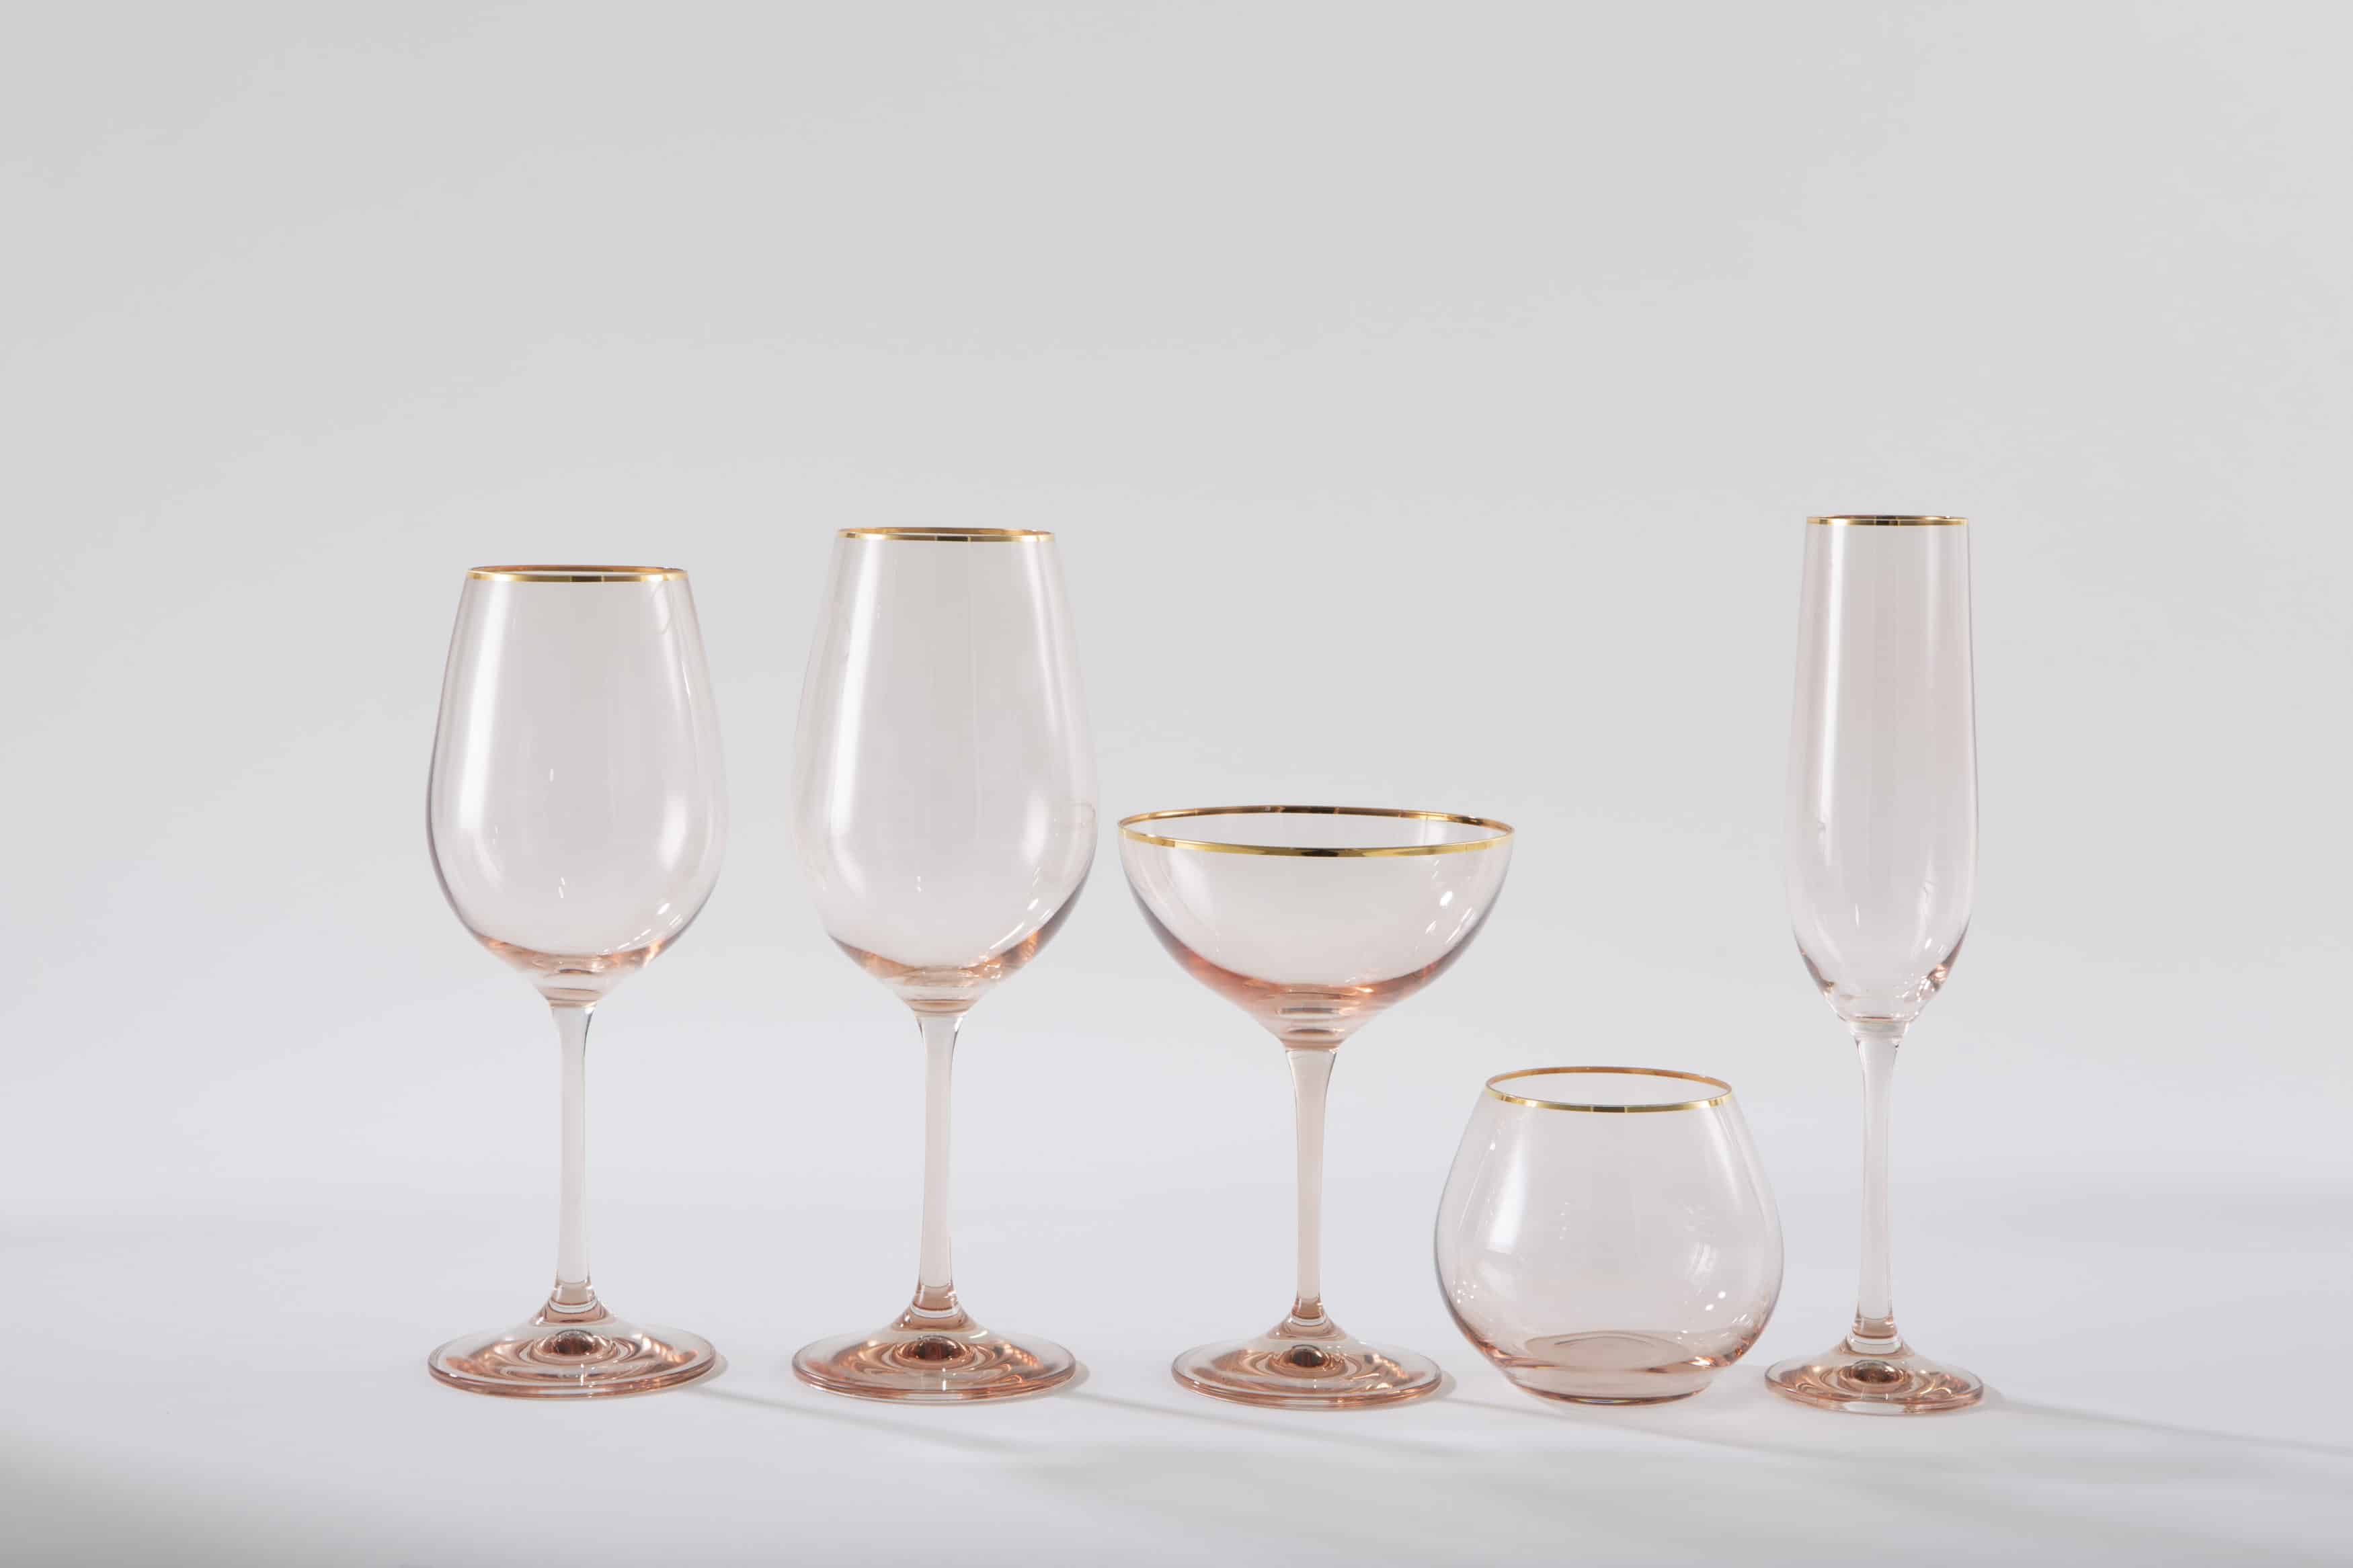  | With the water tumbler Acadia Blush we rent a water glass with a gold rim and light pink colored glass. Whether for an elegant dinner party, a festive reception or a romantic wedding - water glass Acadia Blush is definitely something special for your event.You can rent other glasses from the Acadia Blush series with pink colored glass to match the water tumbler. The complete Acadia Blush series includes water cups, white wine glass, red wine glass, champagne glass and champagne bowl. | 